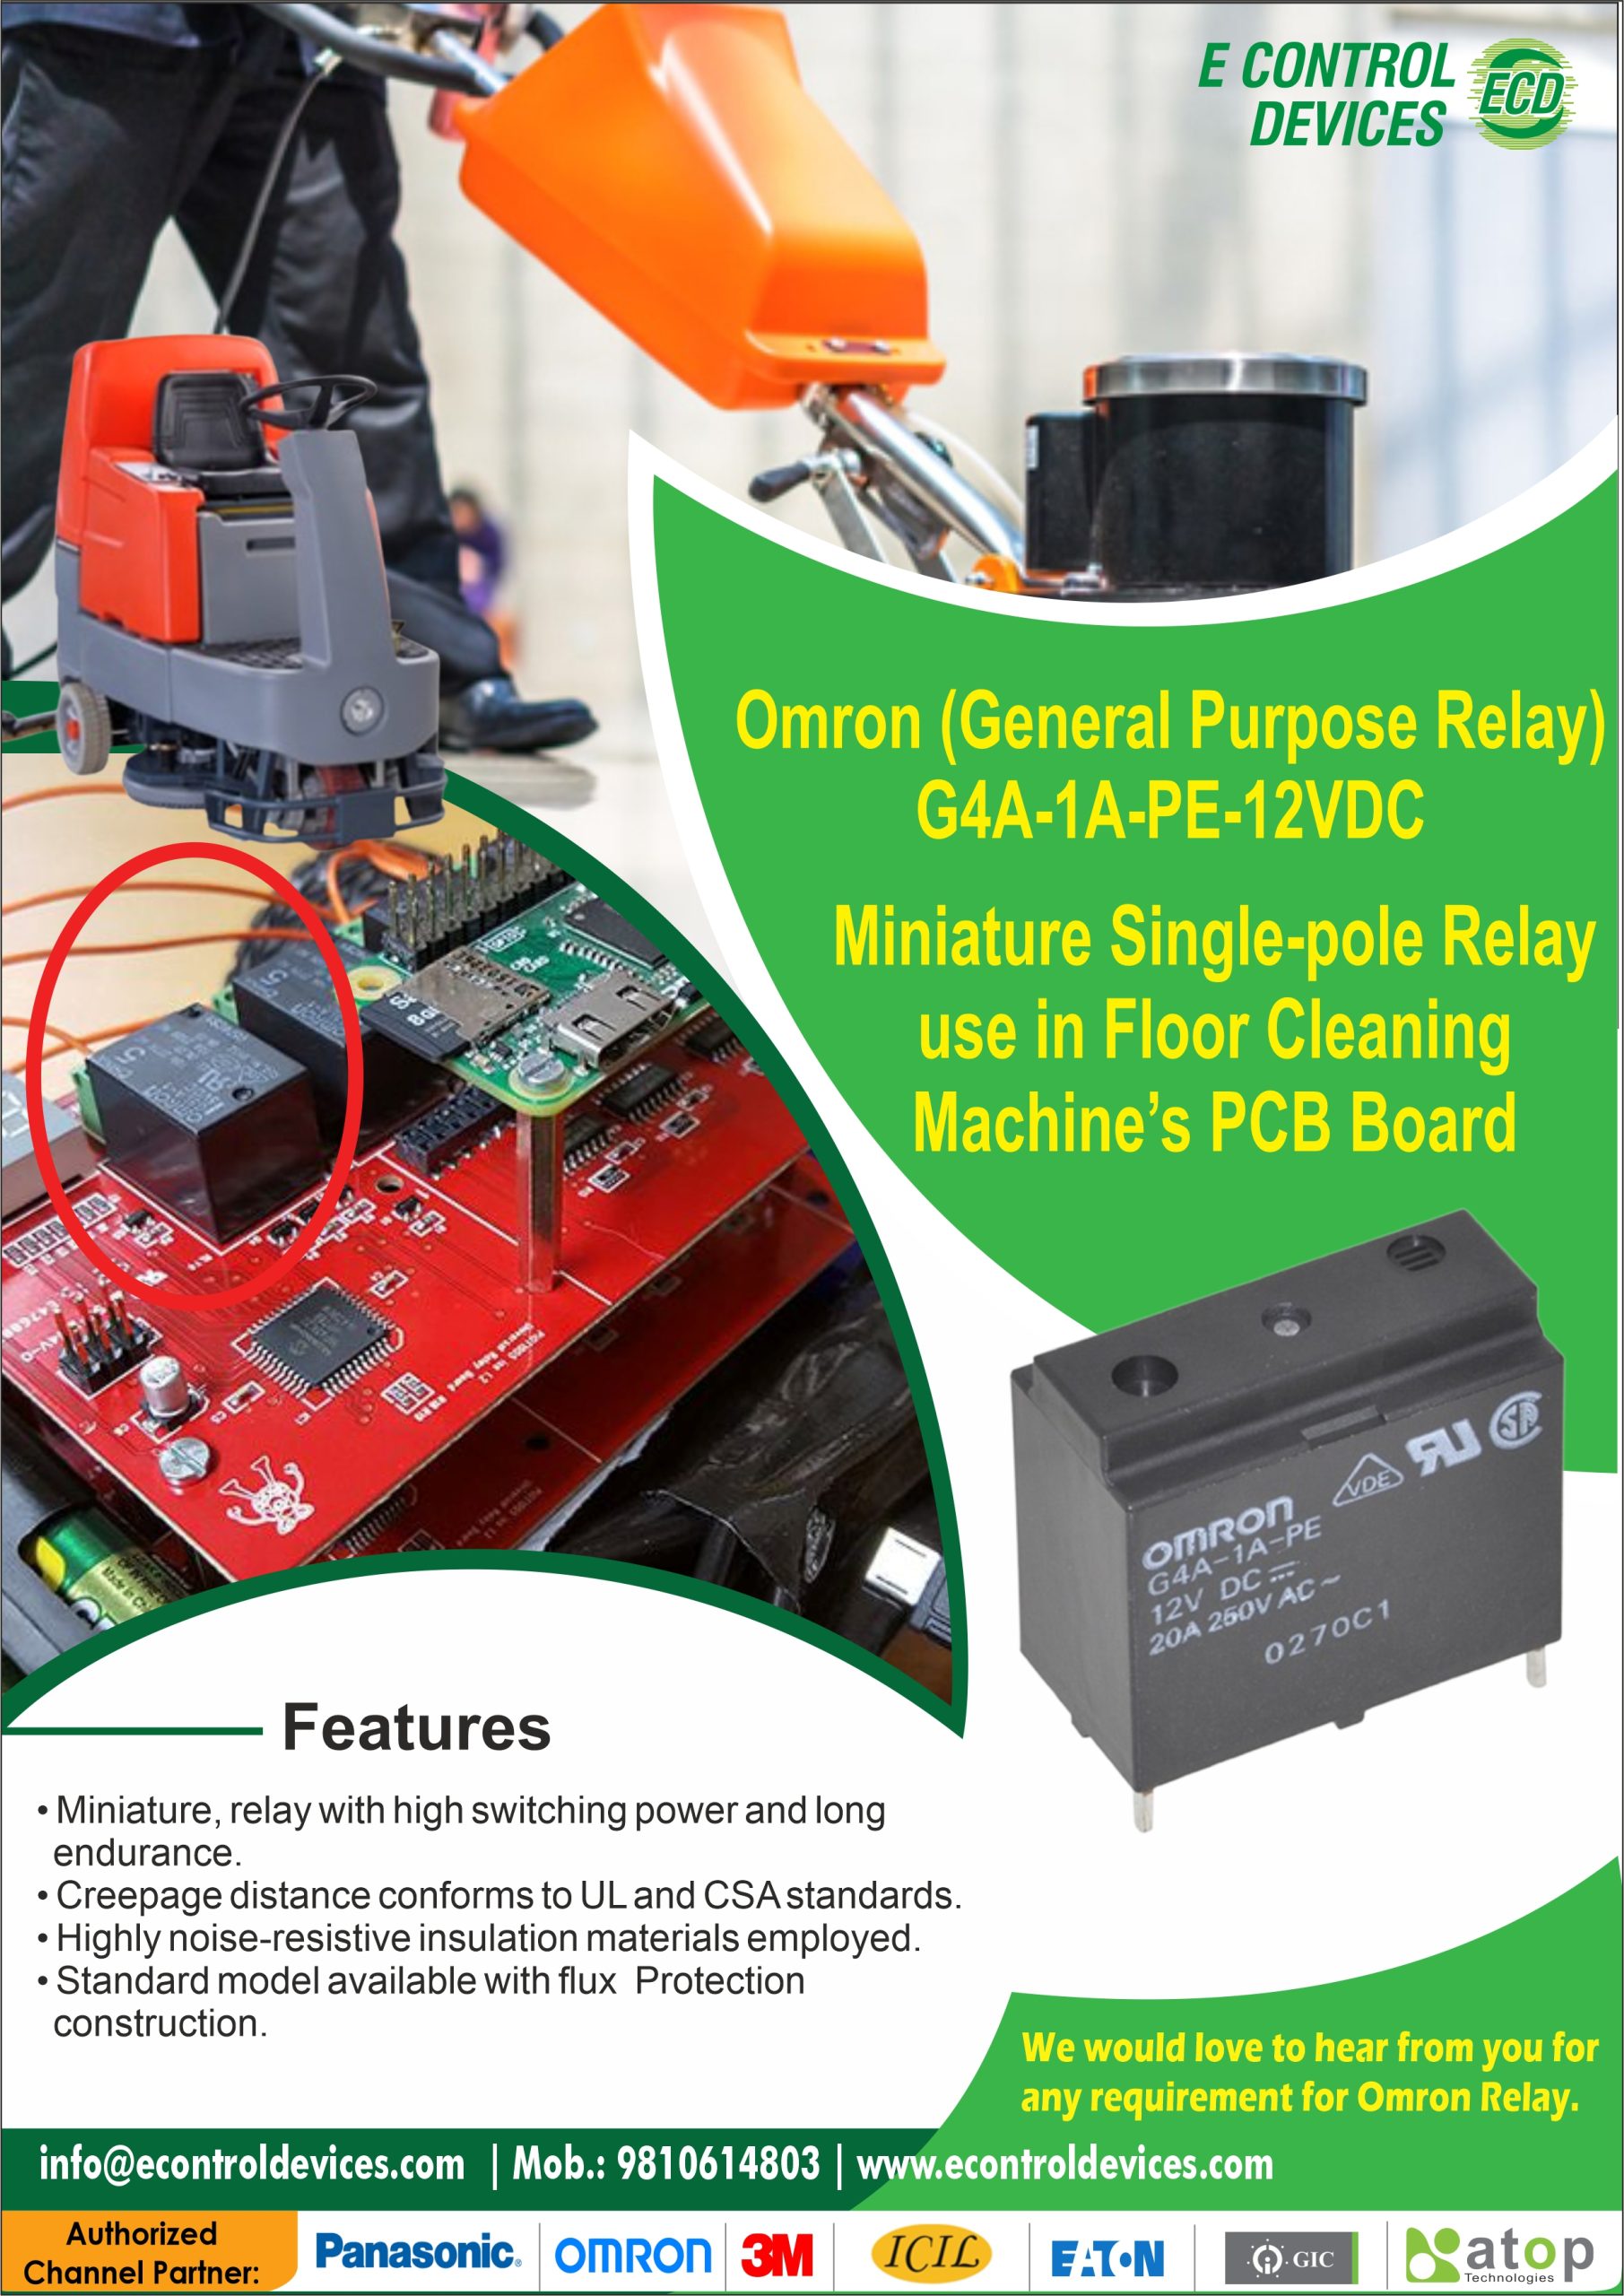 Use Cases of Omron Relays in Heavy Industrial Electronic Machinery